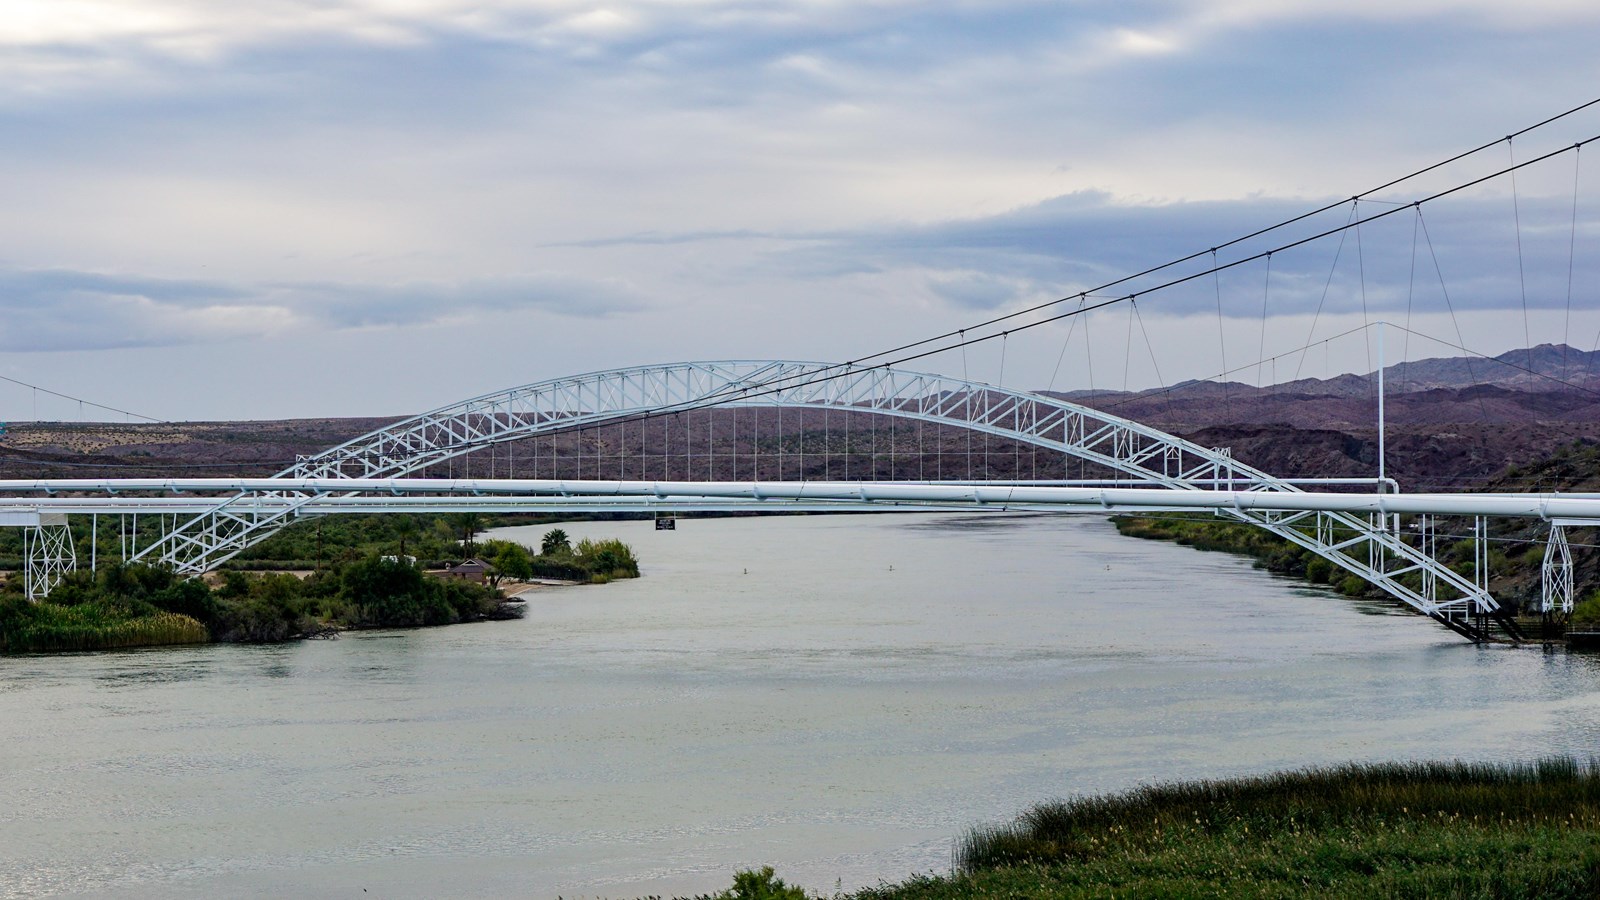 A large white metal bridge spanning a river, with two arches that parallel each other.